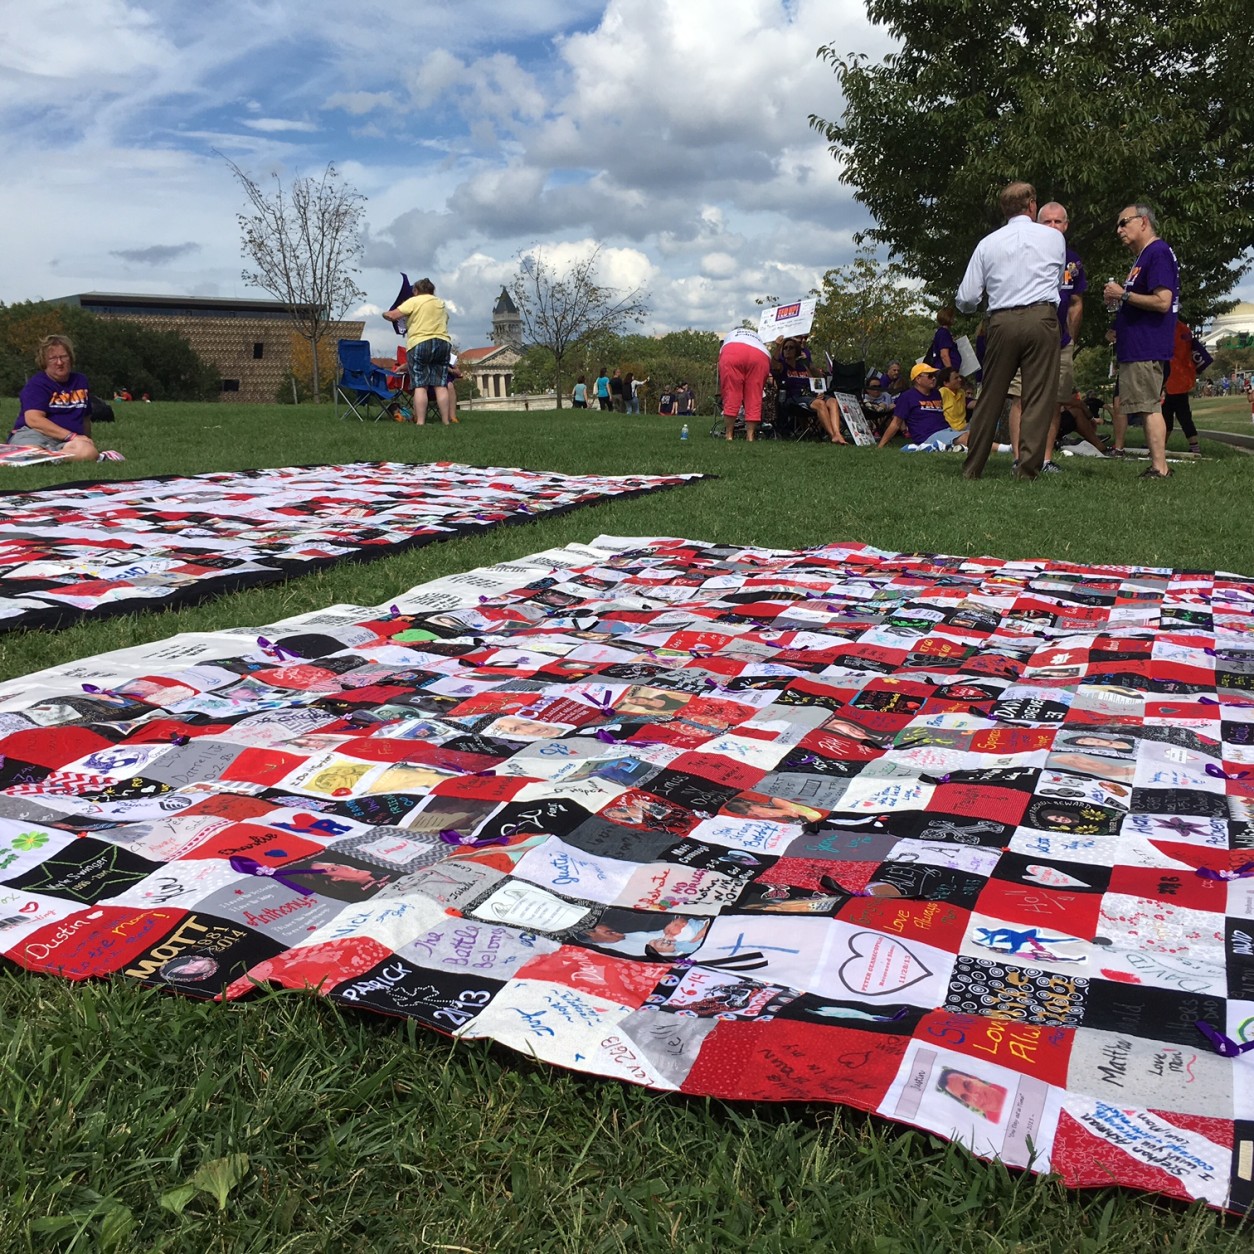 Quilts with the names of people lost to addiction dot the National Mall on Sunday. (WTOP/Liz Anderson)